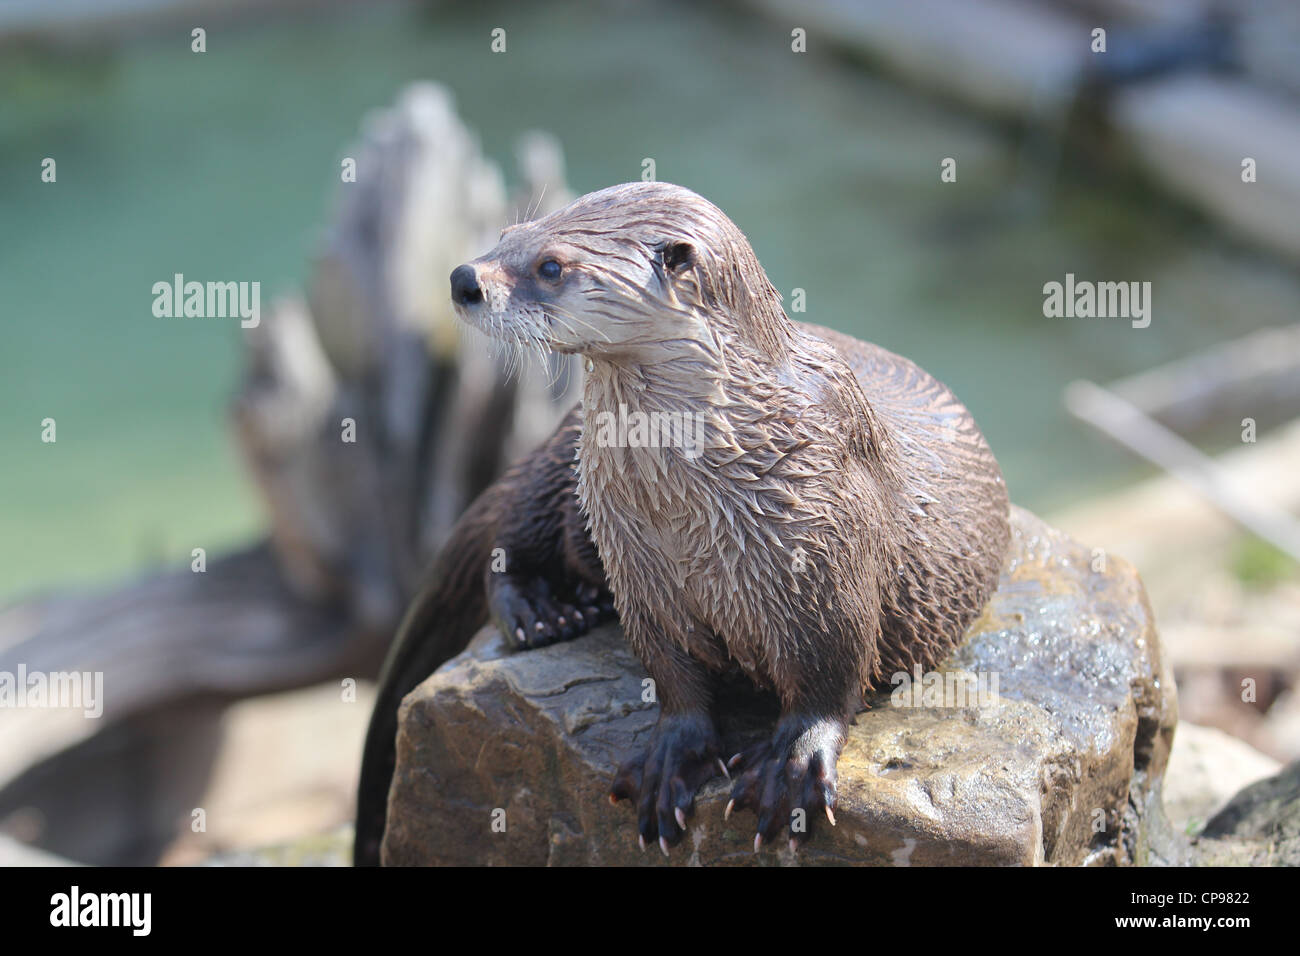 Northern River Otter sitting on a rock, water in background Stock Photo